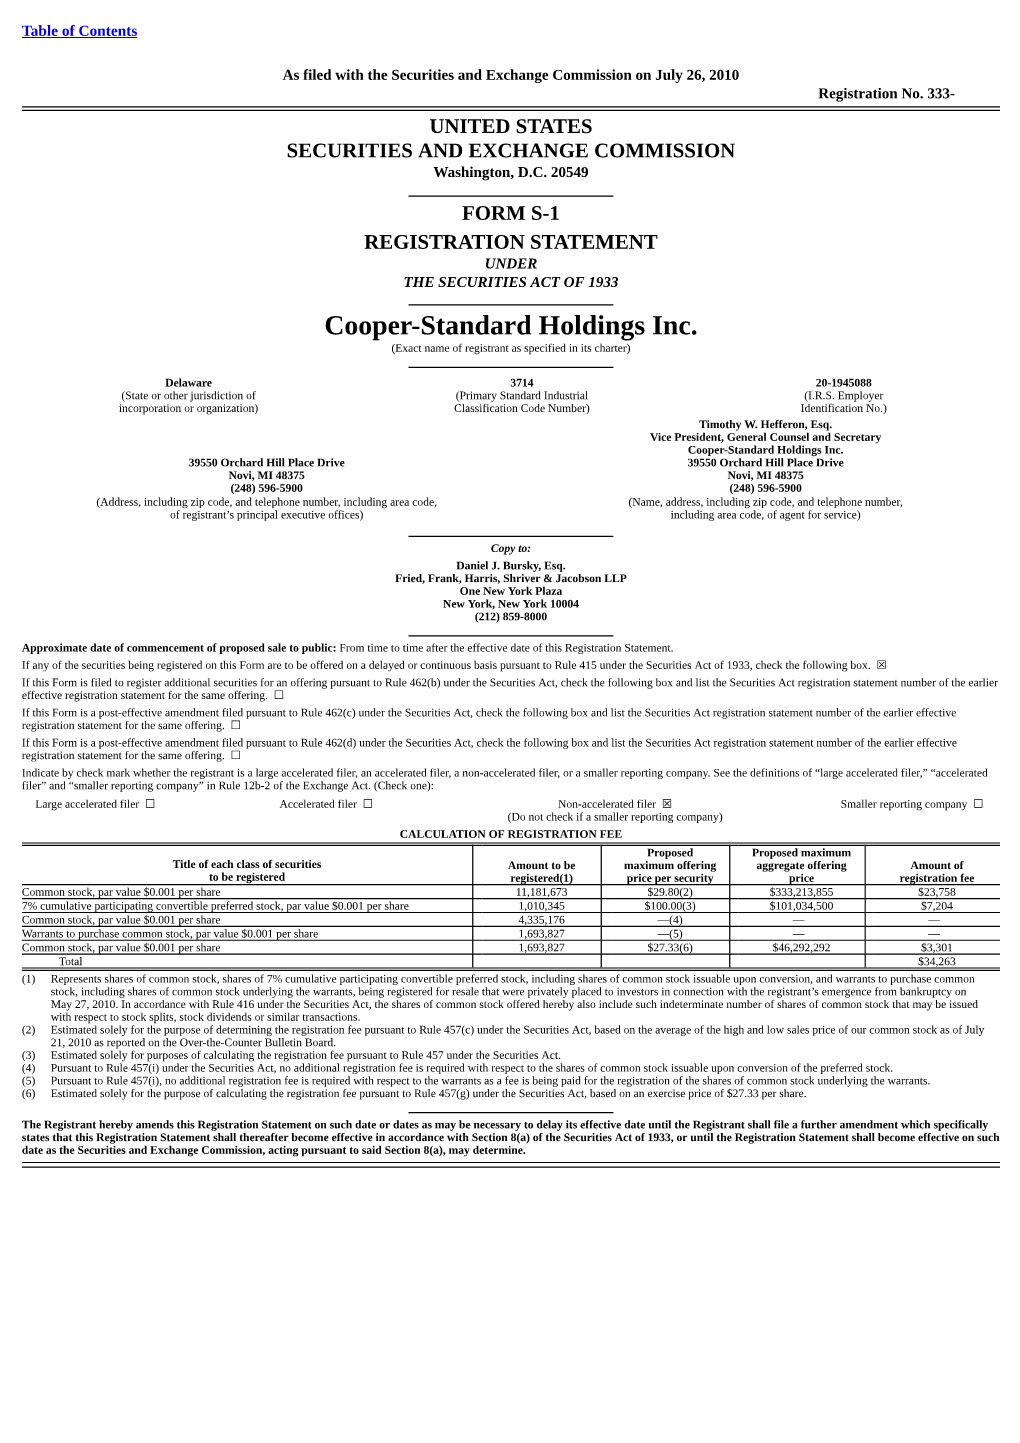 Cooper-Standard Holdings Inc. (Exact Name of Registrant As Specified in Its Charter)